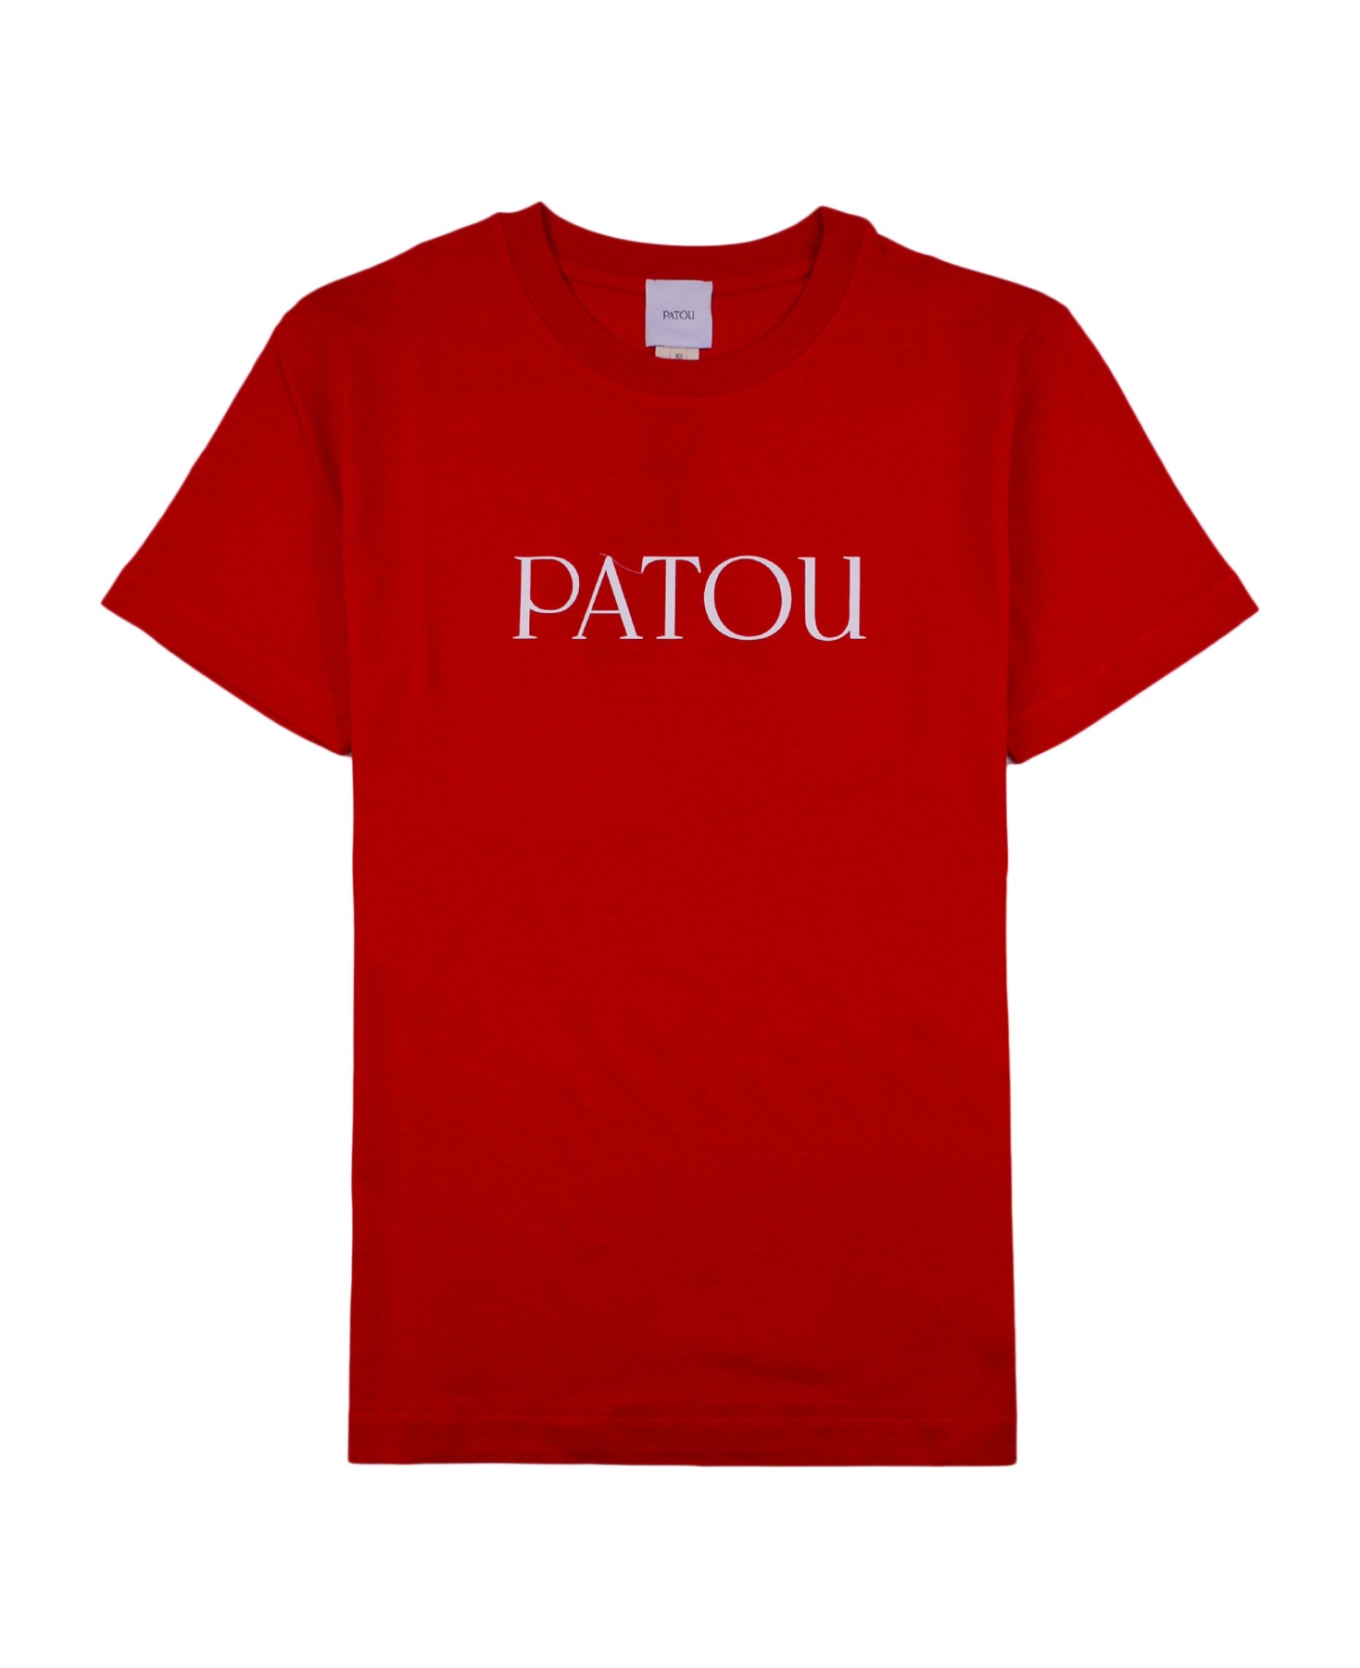 Patou T-shirt - RED Tシャツ